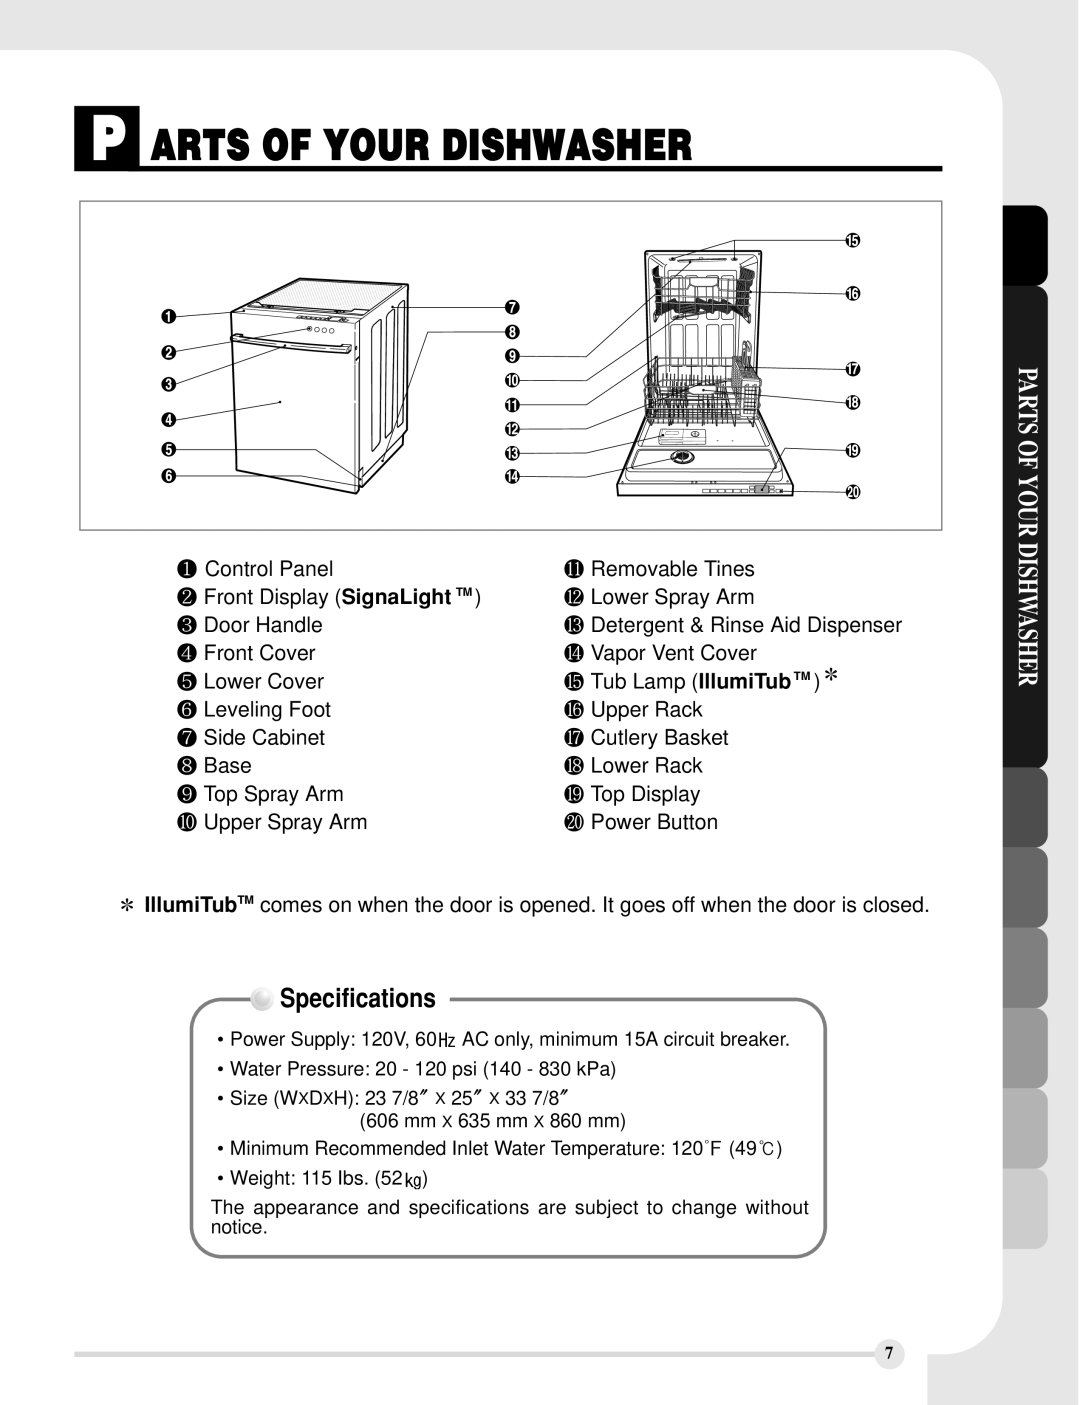 LG Electronics LDF8812WW, LDF8812ST, LDF8812BB manual P Arts Of Your Dishwasher, Specifications, Parts Of Your Dishwasher 